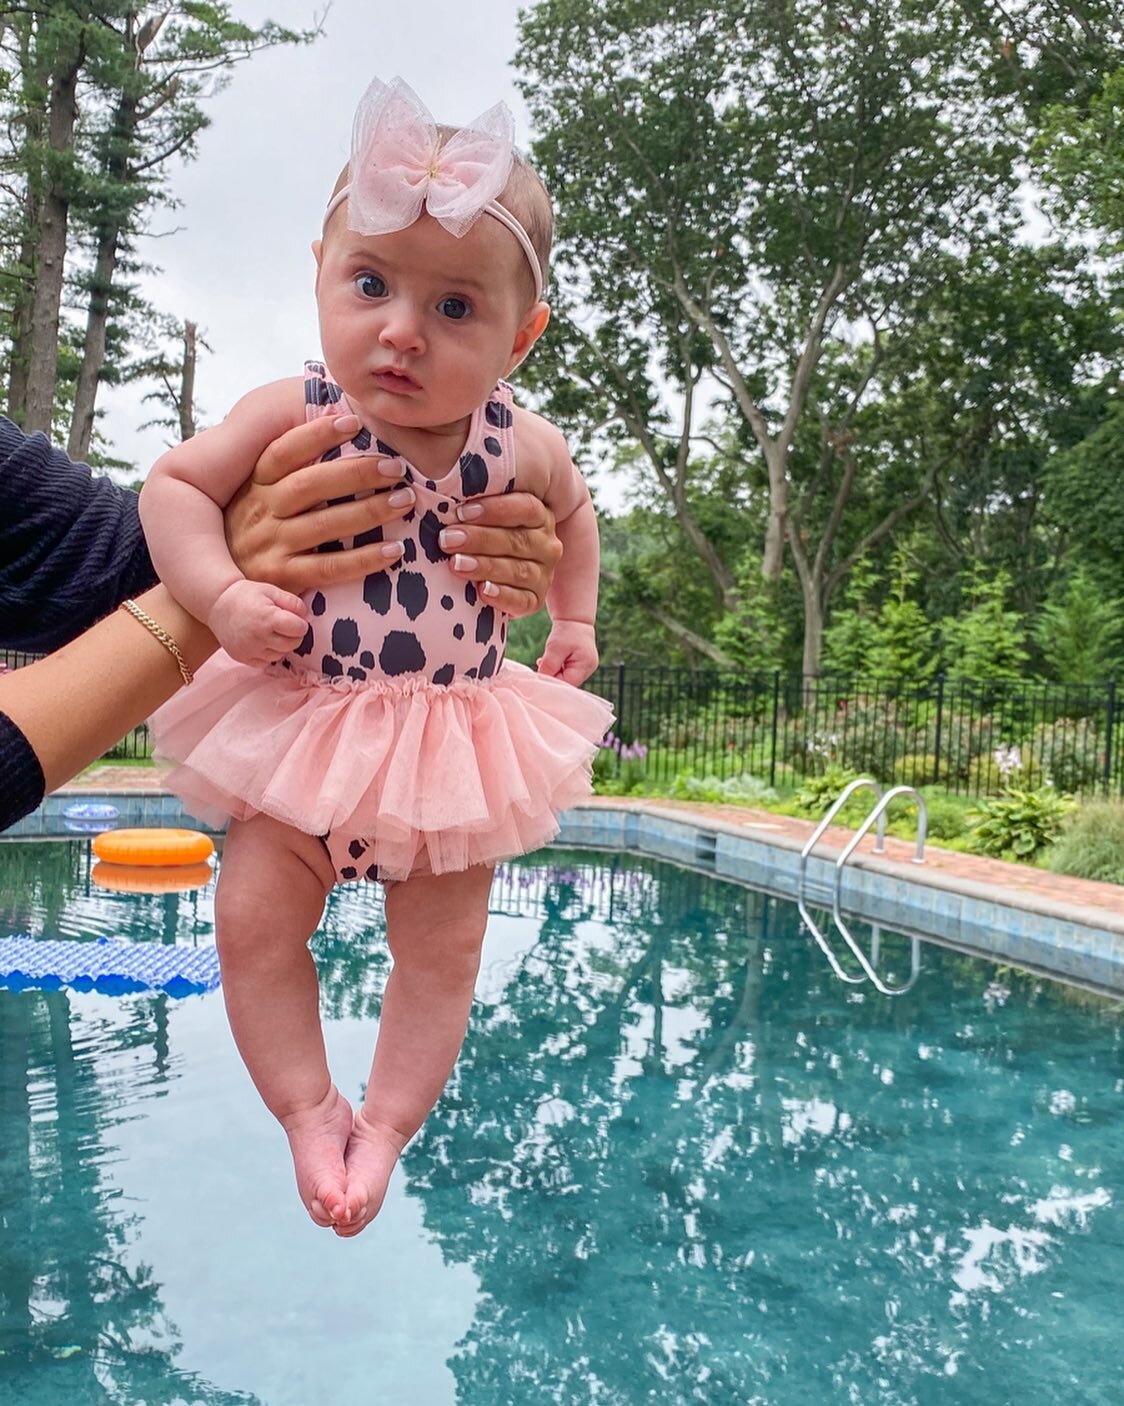 4 months of princess Serena P serving us with outfit inspo &amp; facial expressions ❤️&zwj;🔥

P.S. can&rsquo;t believe my baby is 4 months old today 🥺
#SerenaPaige #4monthsold #poolday #beachlook #poolattire #princessp